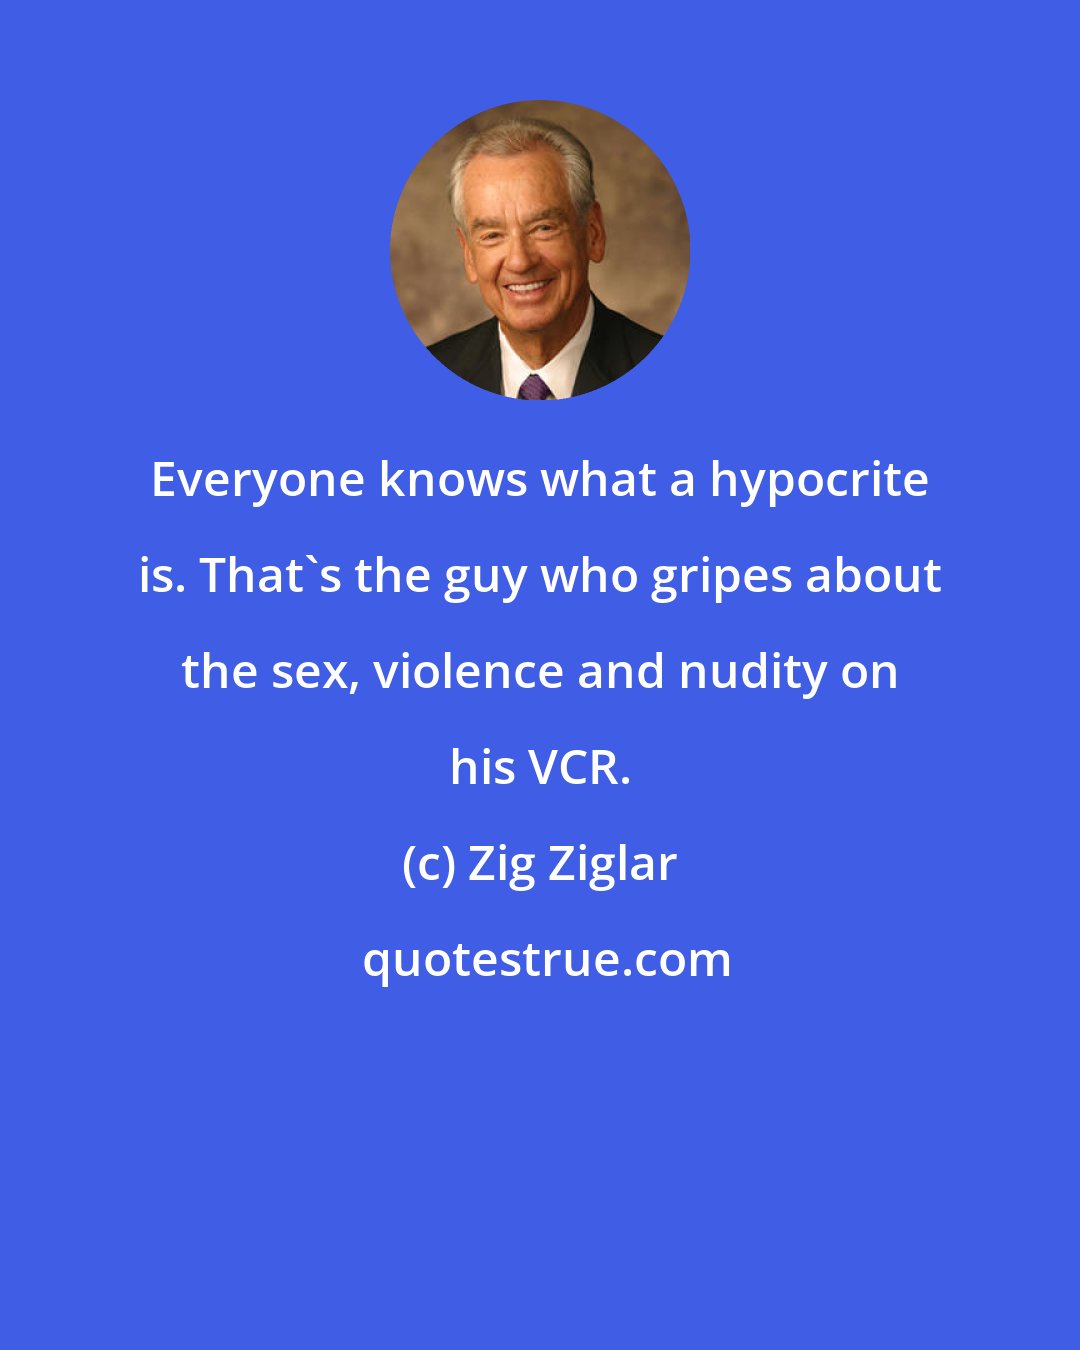 Zig Ziglar: Everyone knows what a hypocrite is. That's the guy who gripes about the sex, violence and nudity on his VCR.